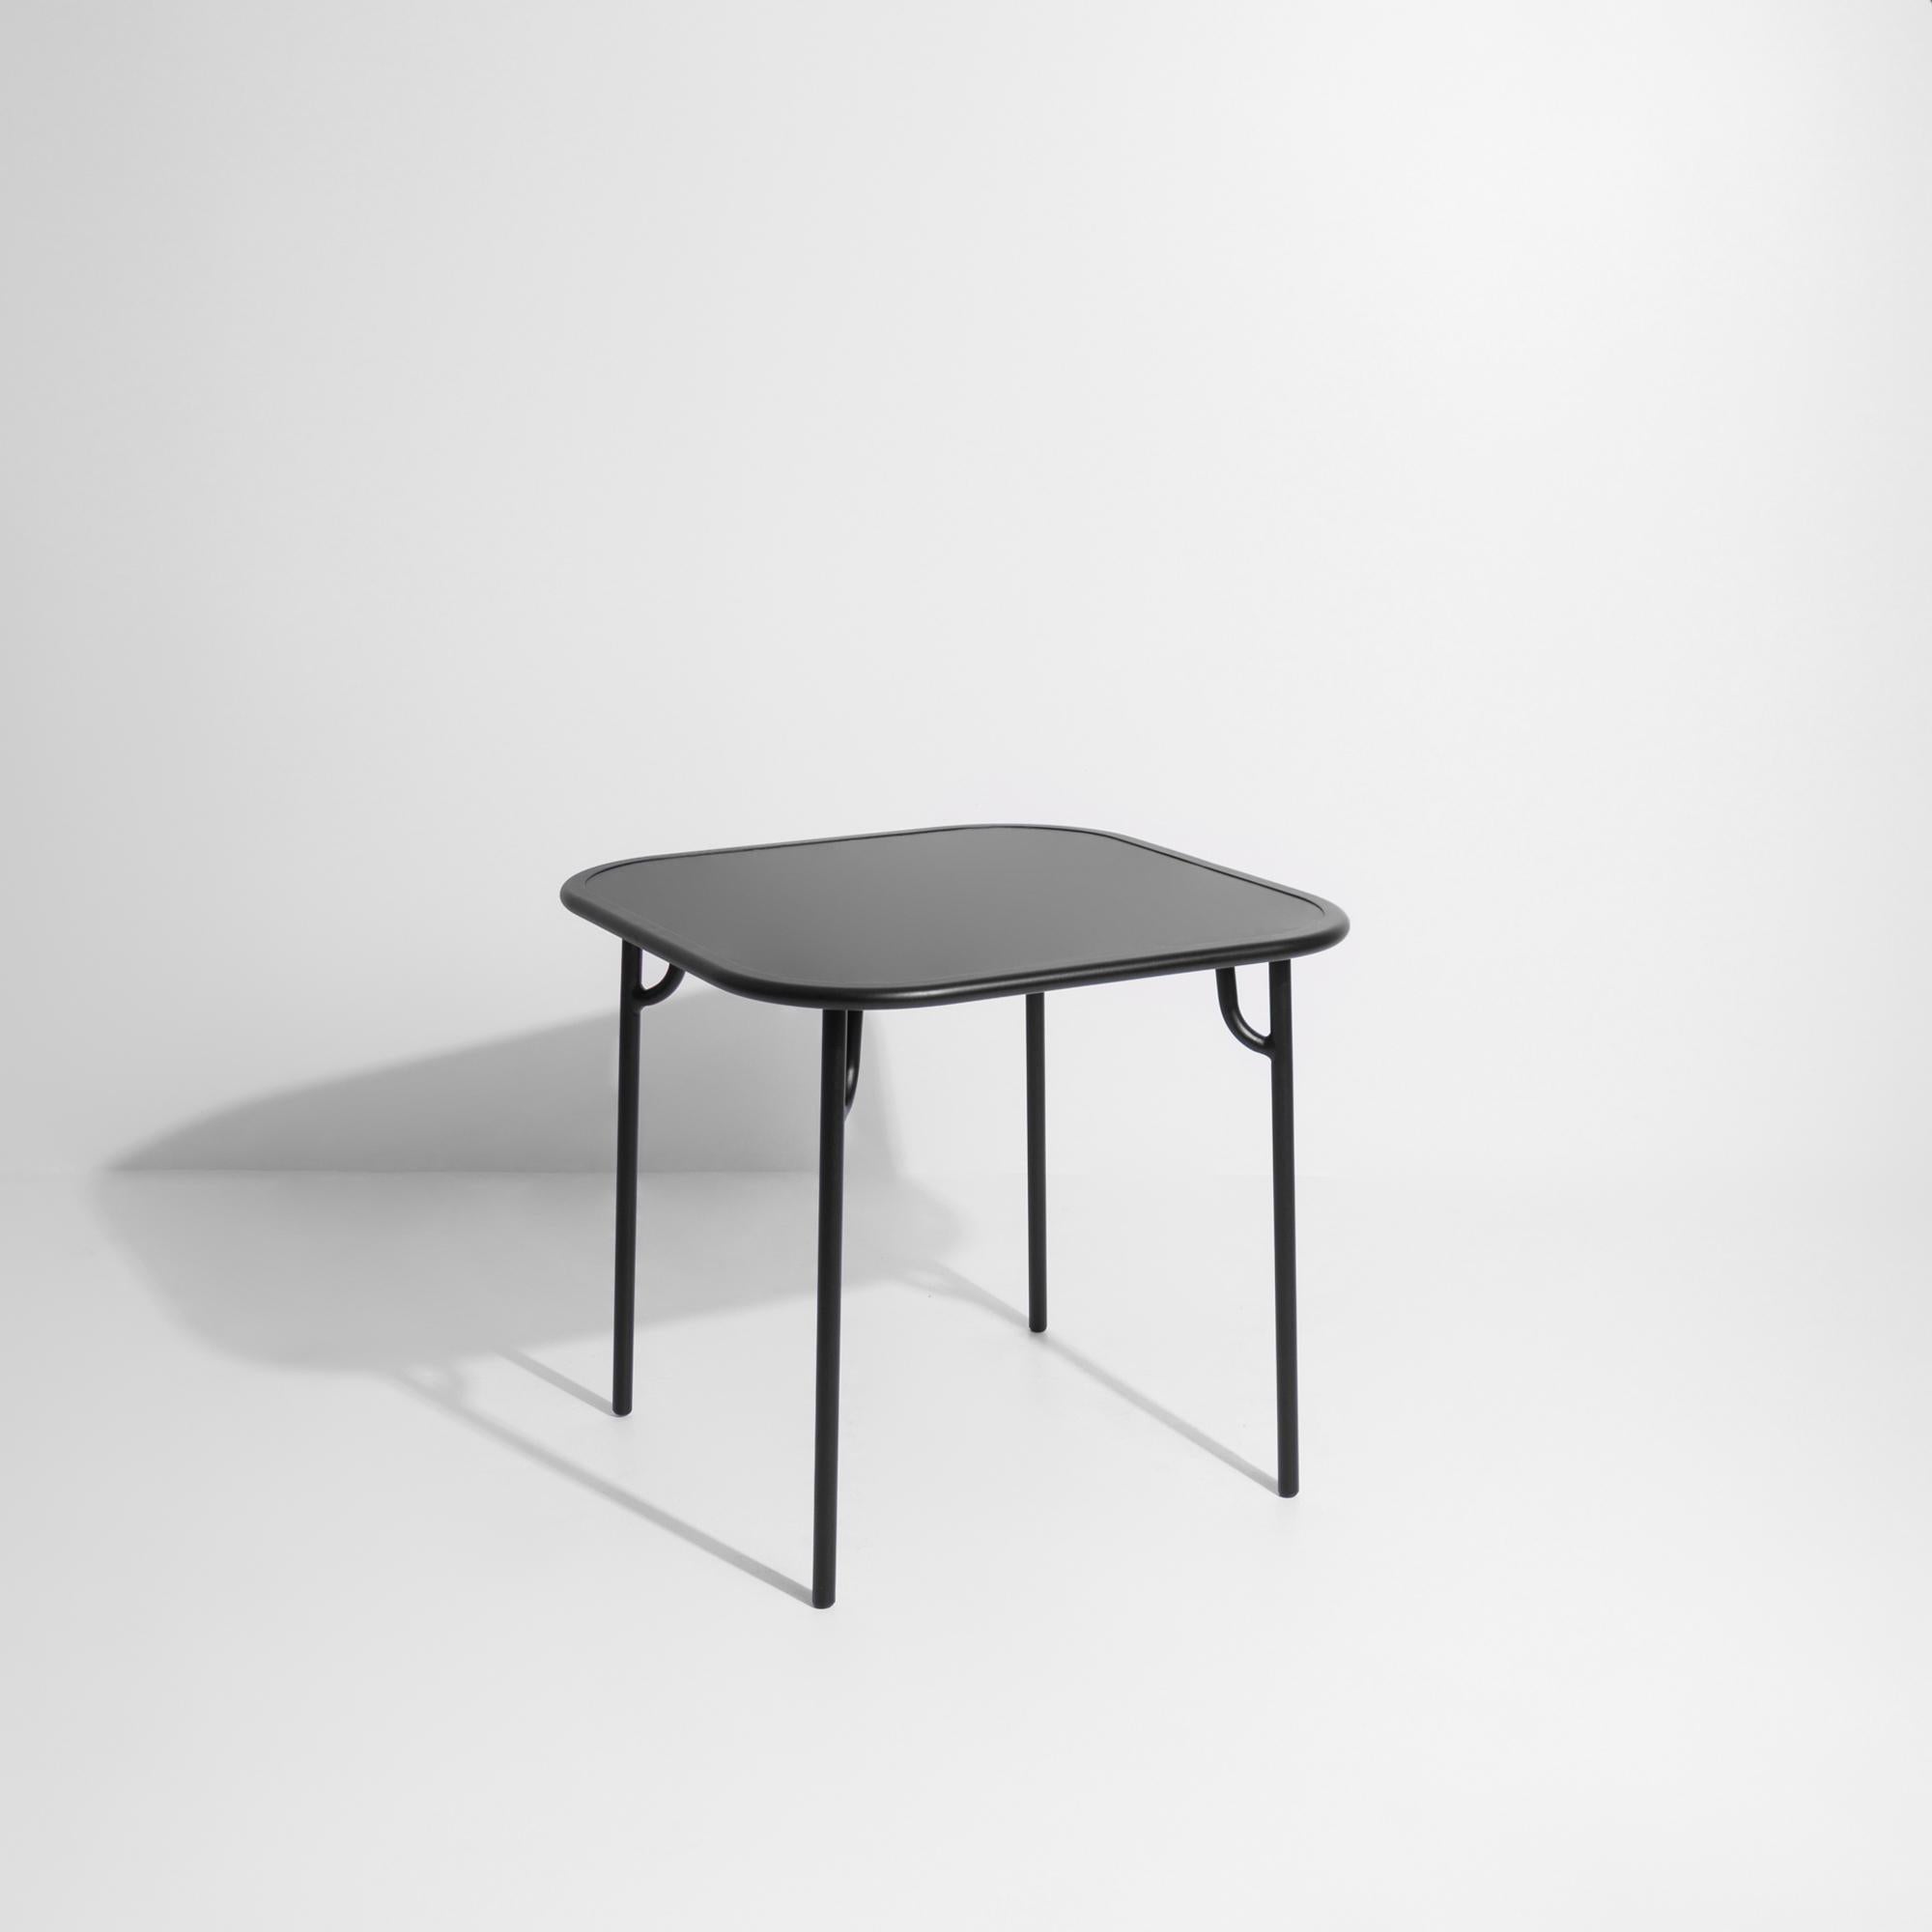 Chinese Petite Friture Week-End Plain Square Dining Table in Black Aluminium, 2017 For Sale